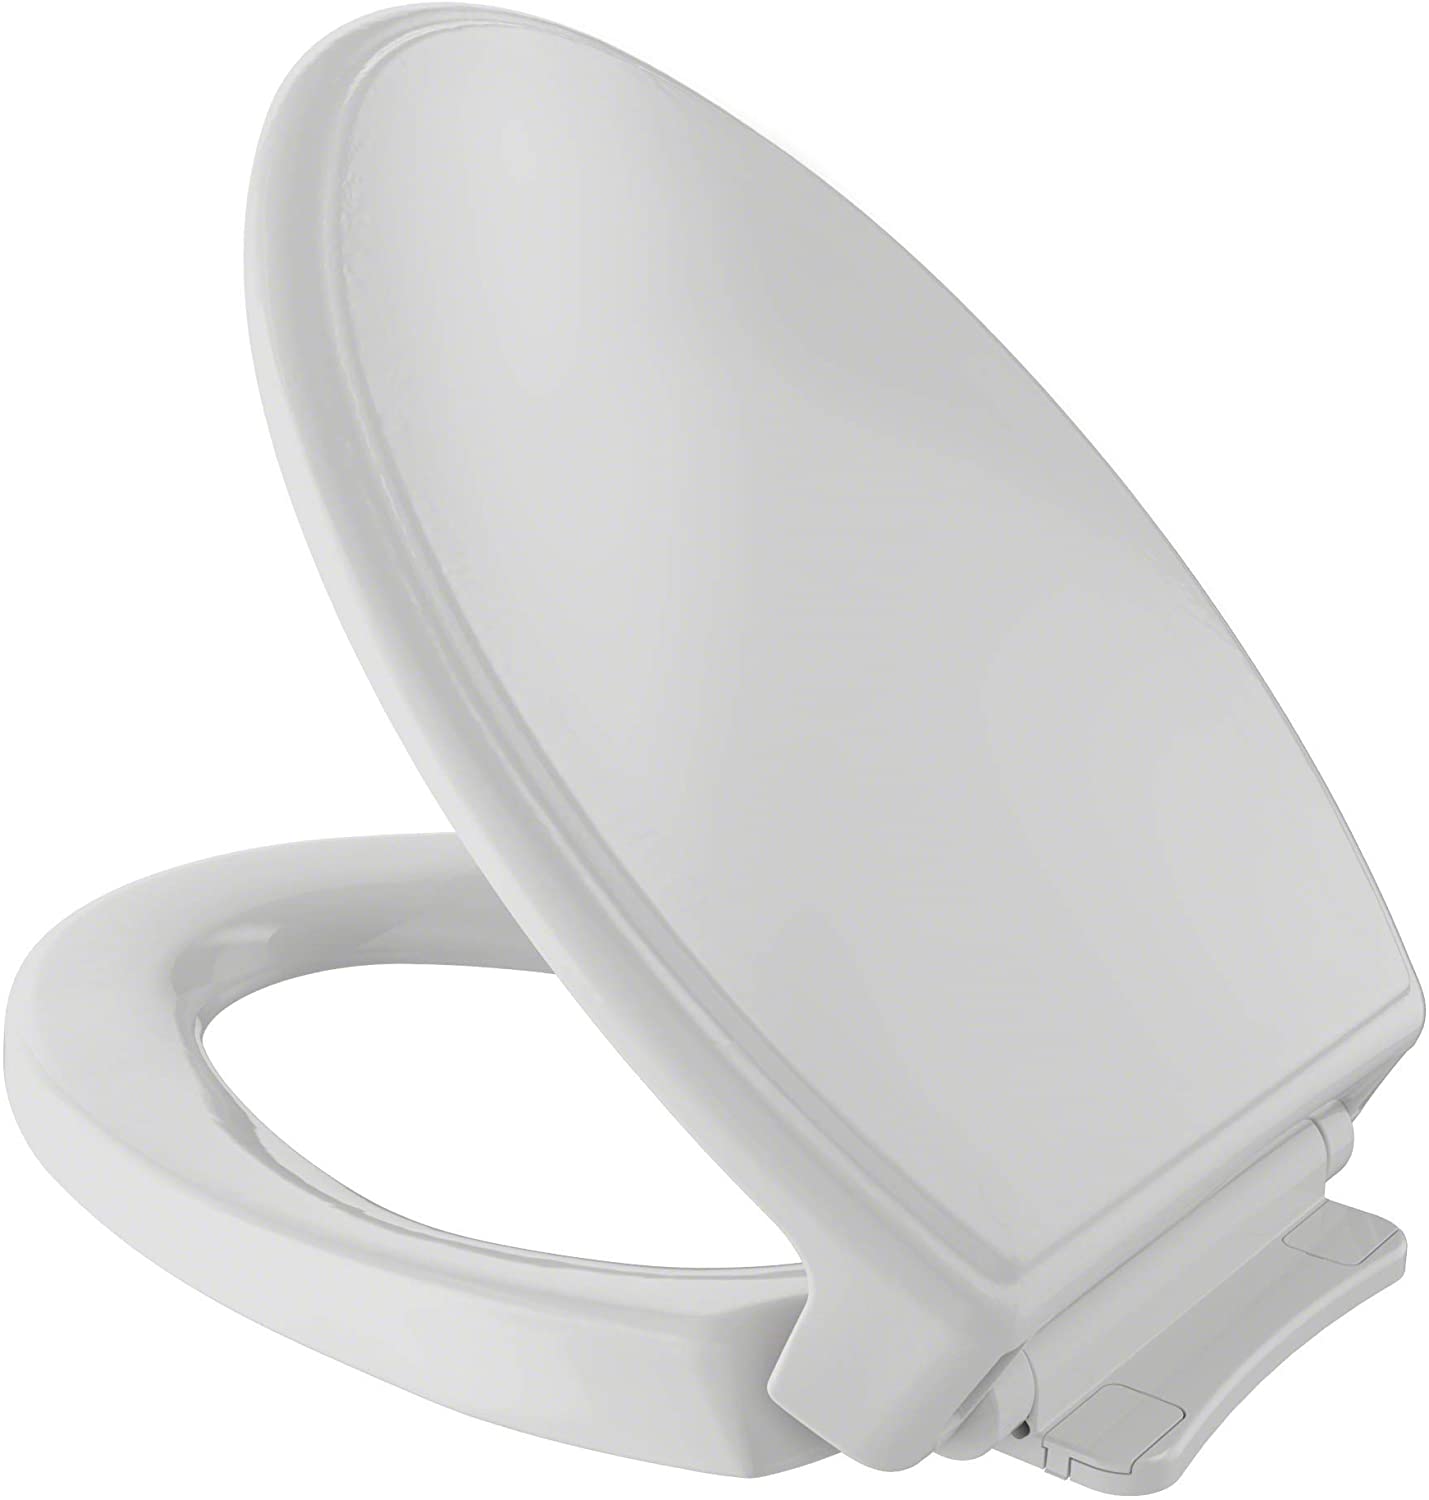 OTO SS154#11 Traditional SoftClose Elongated Toilet Seat